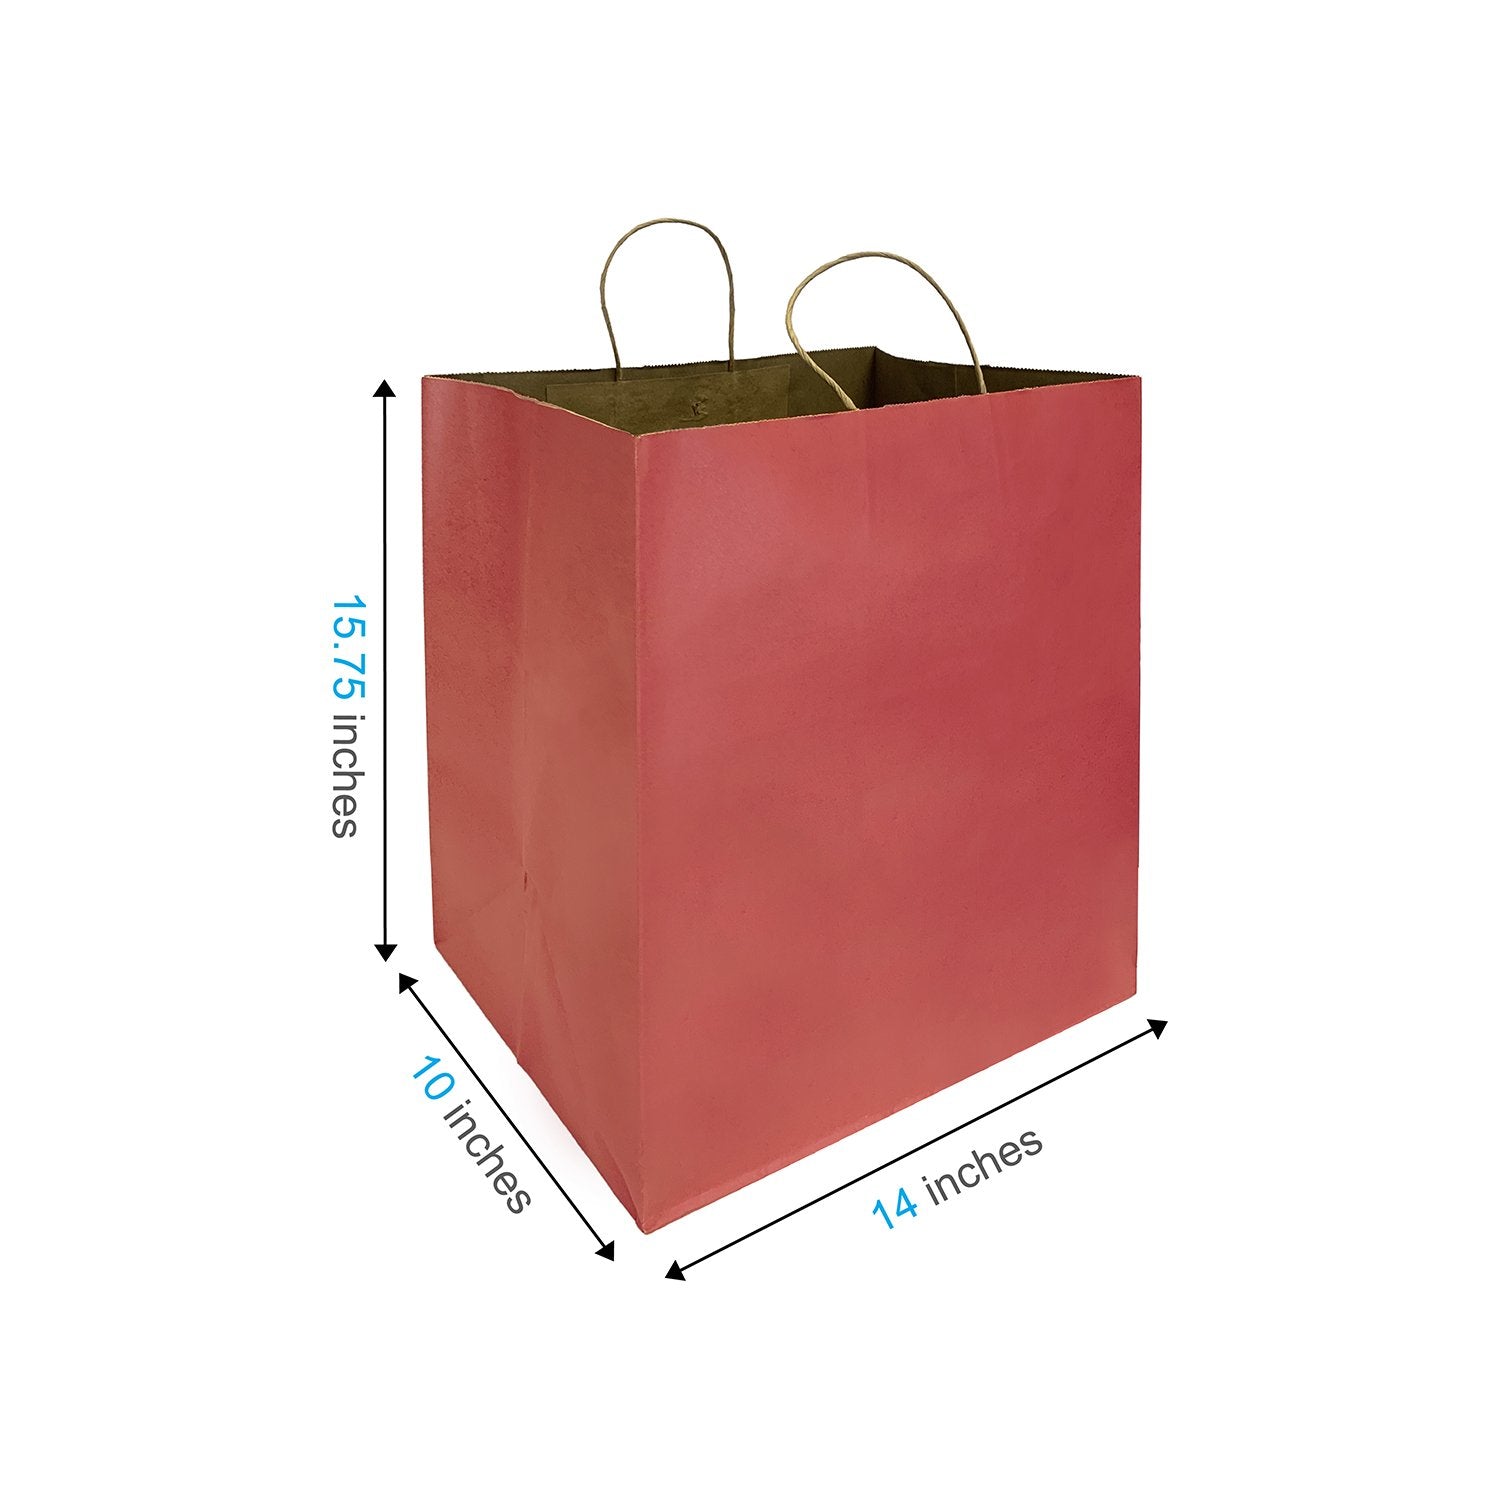 200 Pcs, Super Royal, 14x10x15.75 inches, Burgundy Kraft Paper Bags, with Twisted Handle